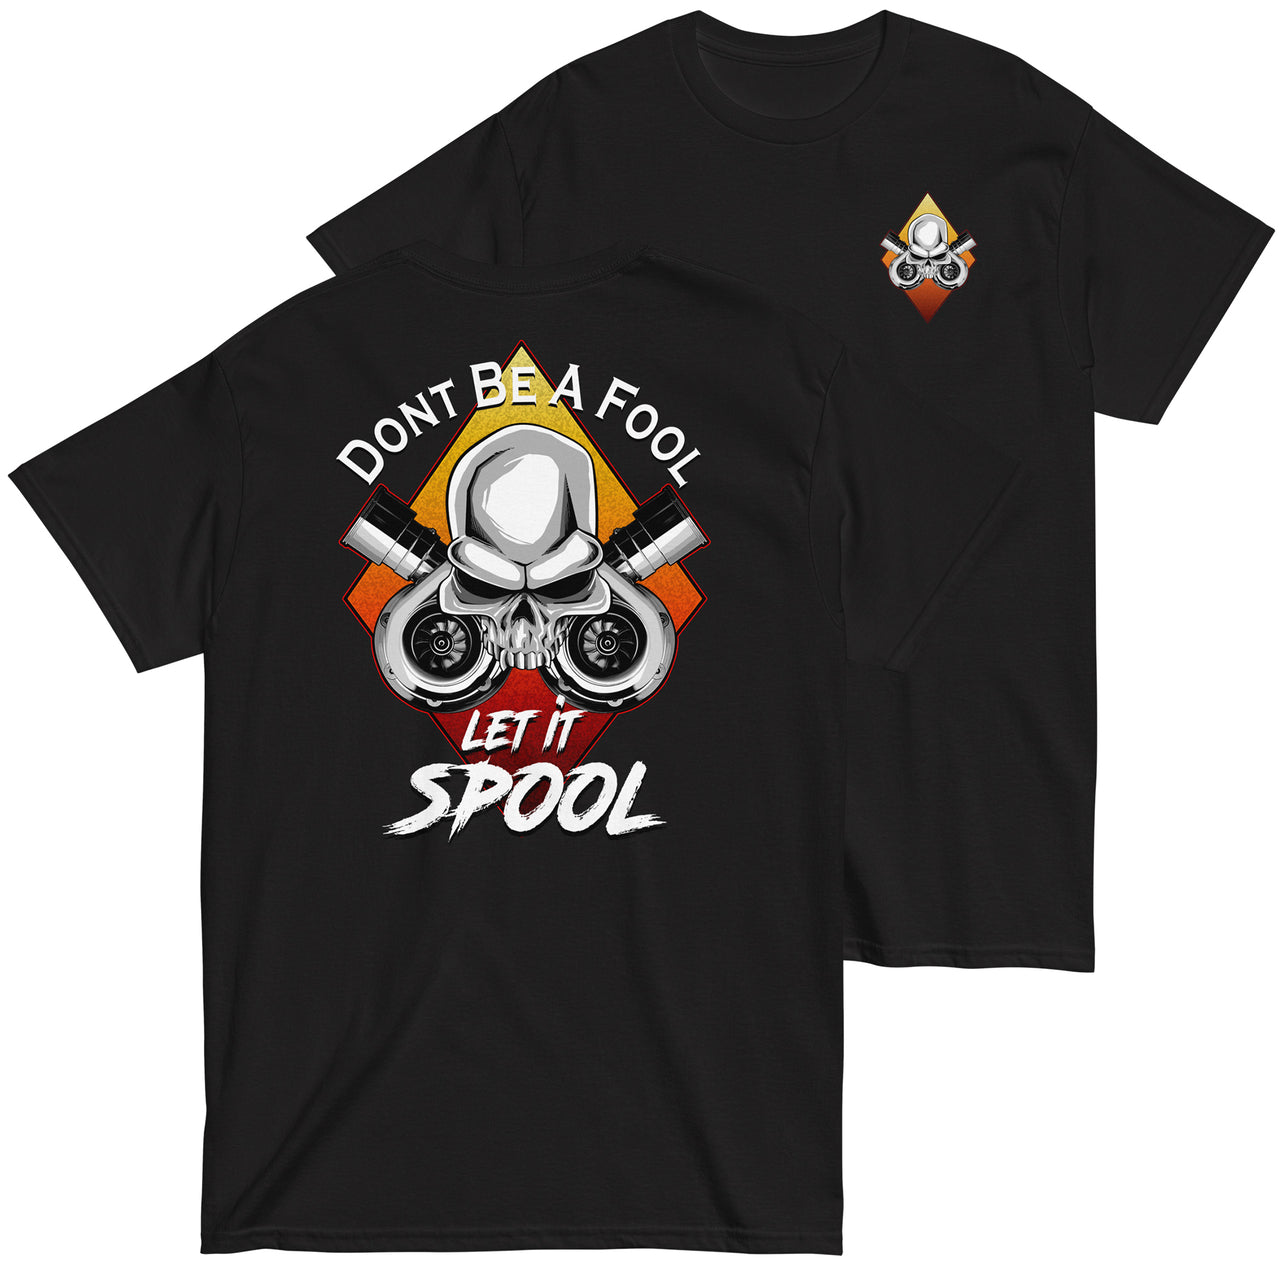 Dont Be A Fool - Spool Turbo T-Shirt in black